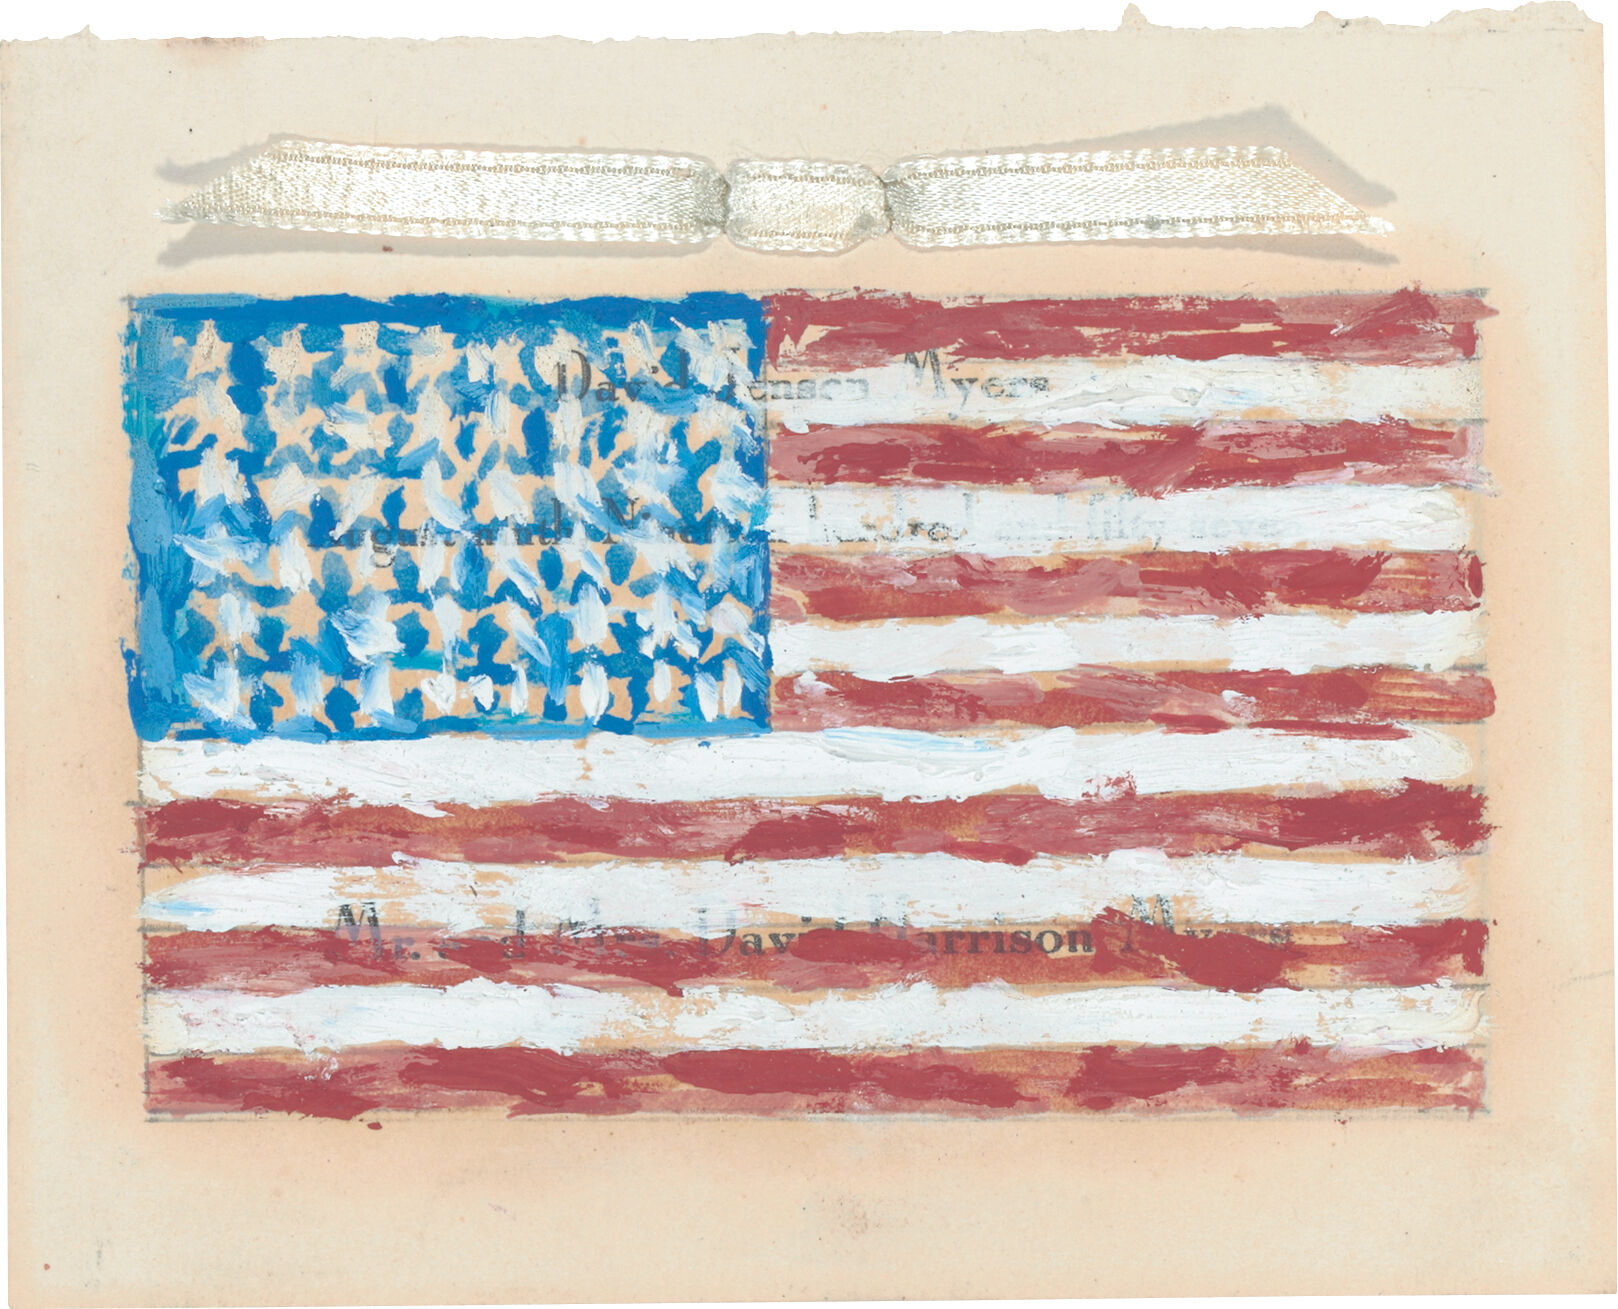 Loosely painted American flag, with names showing through from beneath the paint, with a fragment of white ribbon stretching out above the flag.